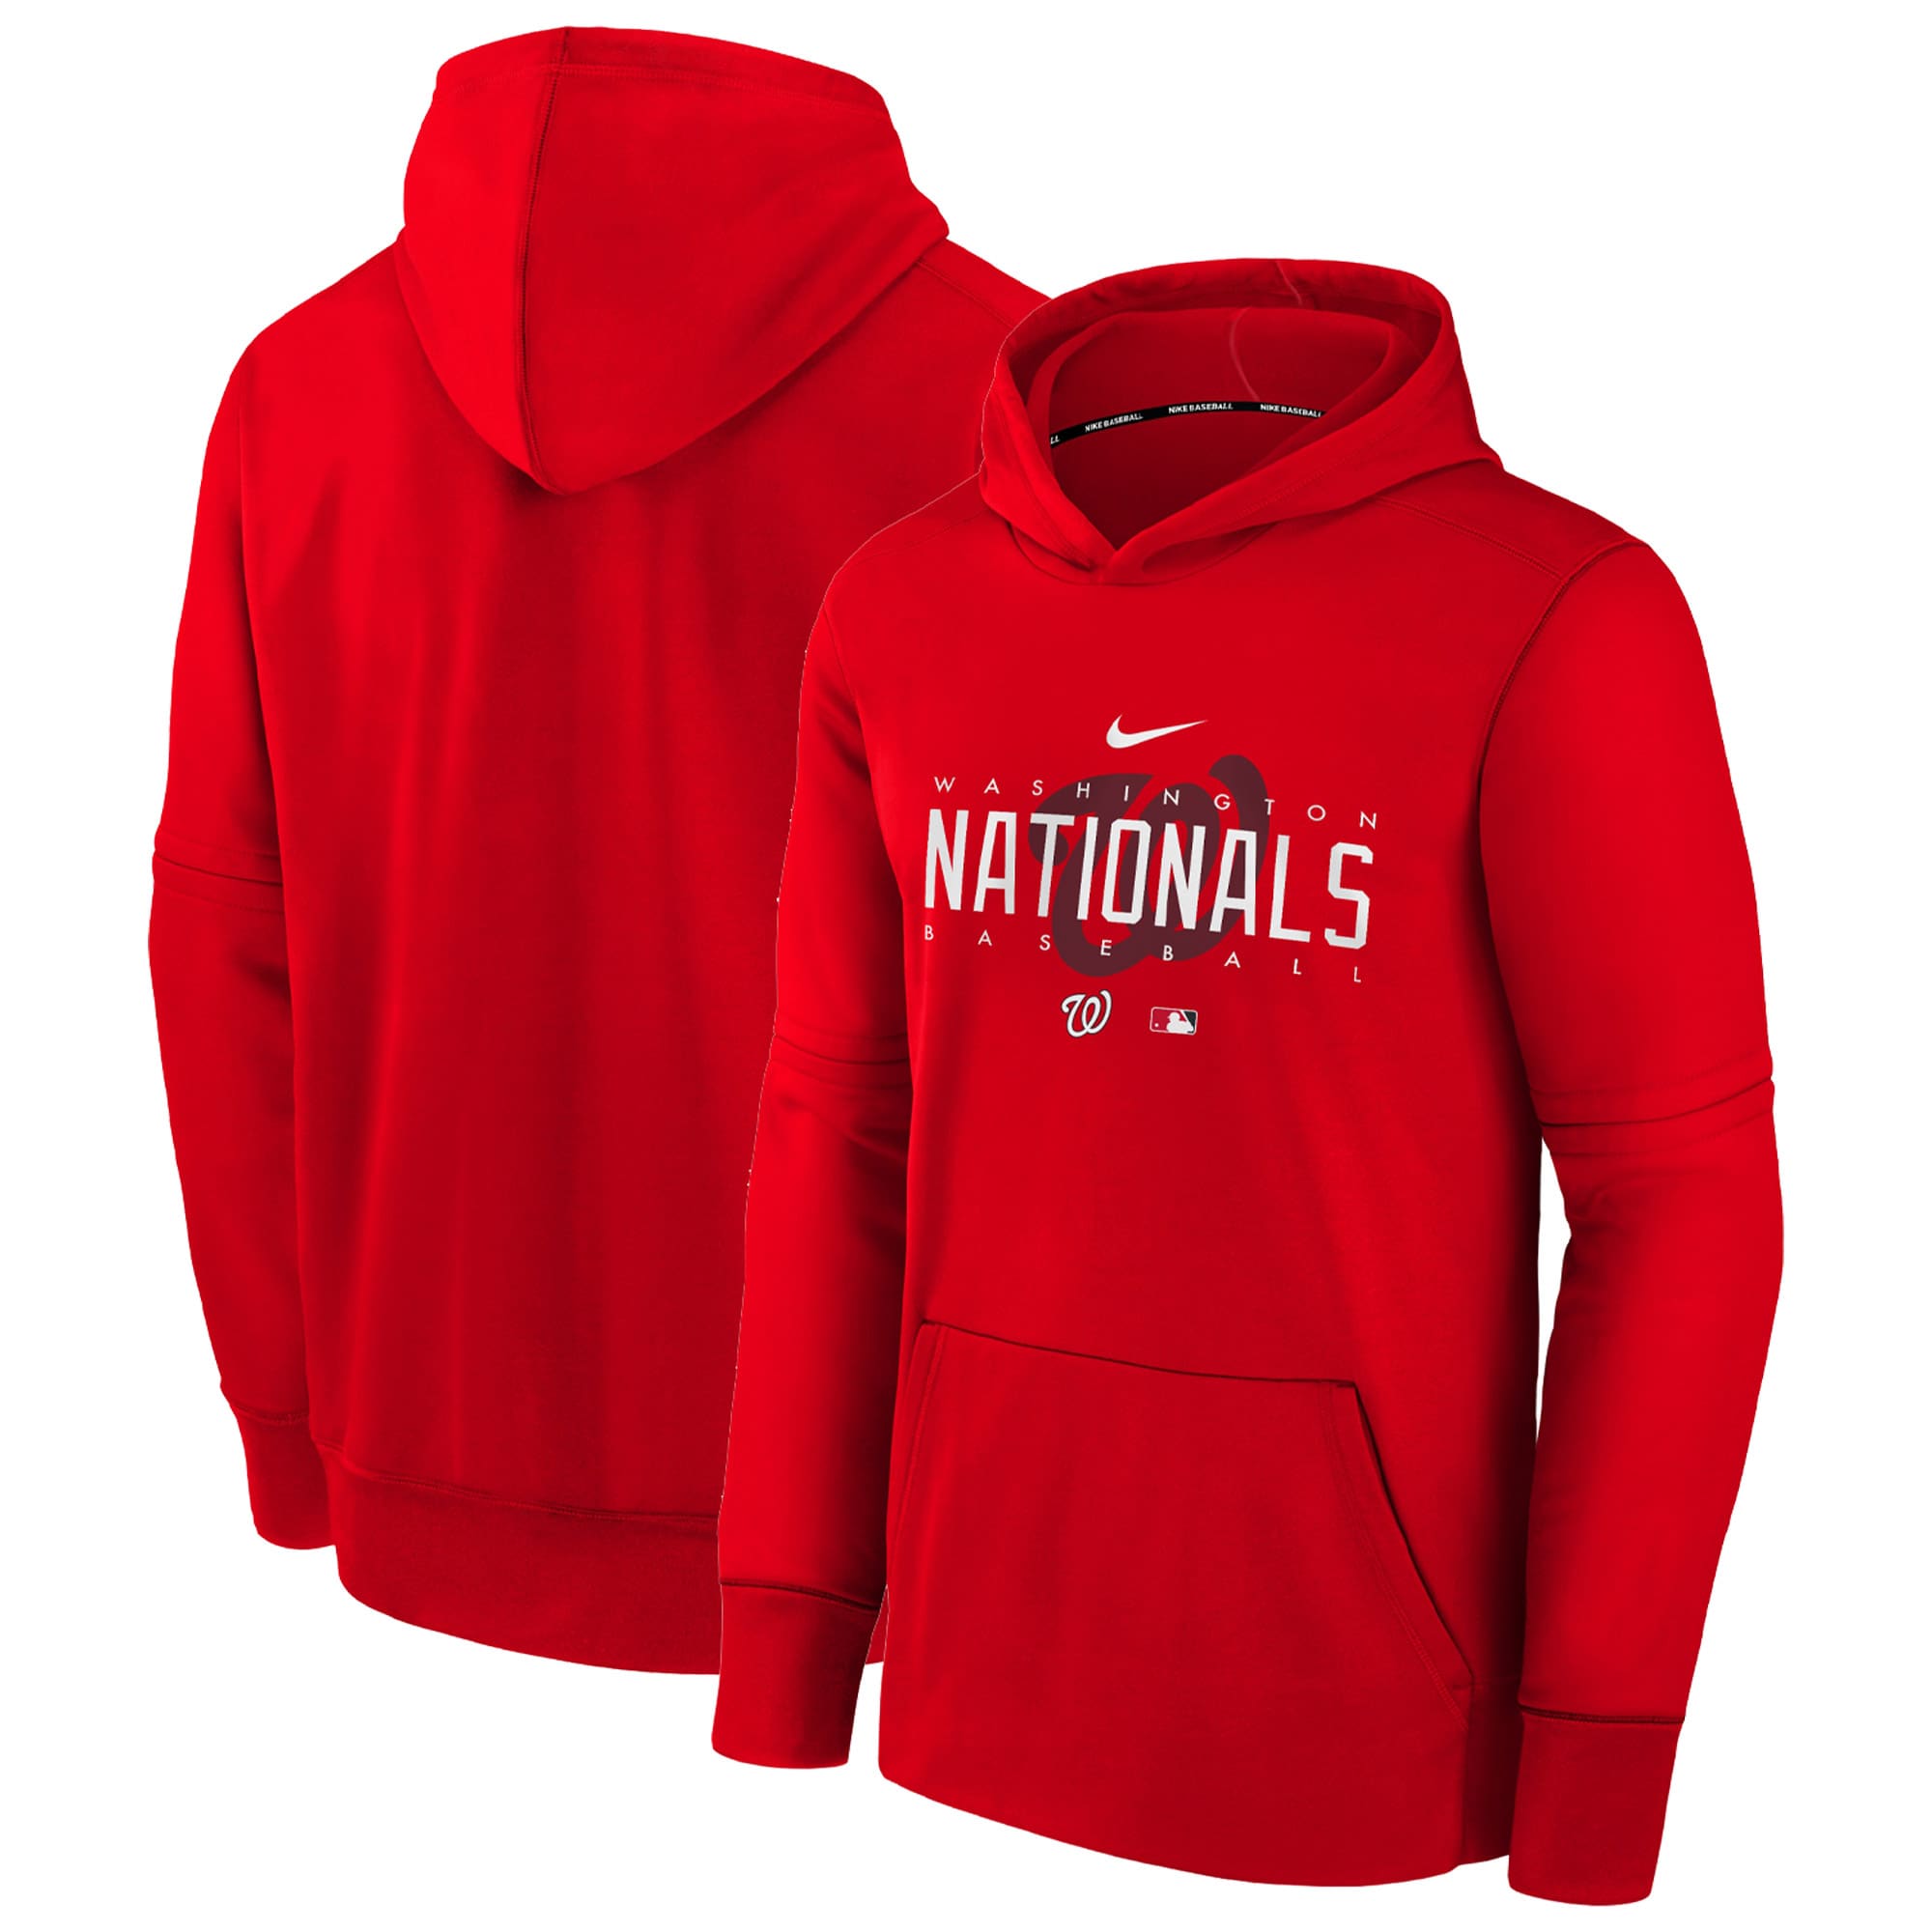 Youth Washington Nationals Red Pregame Performance Pullover Hoodie